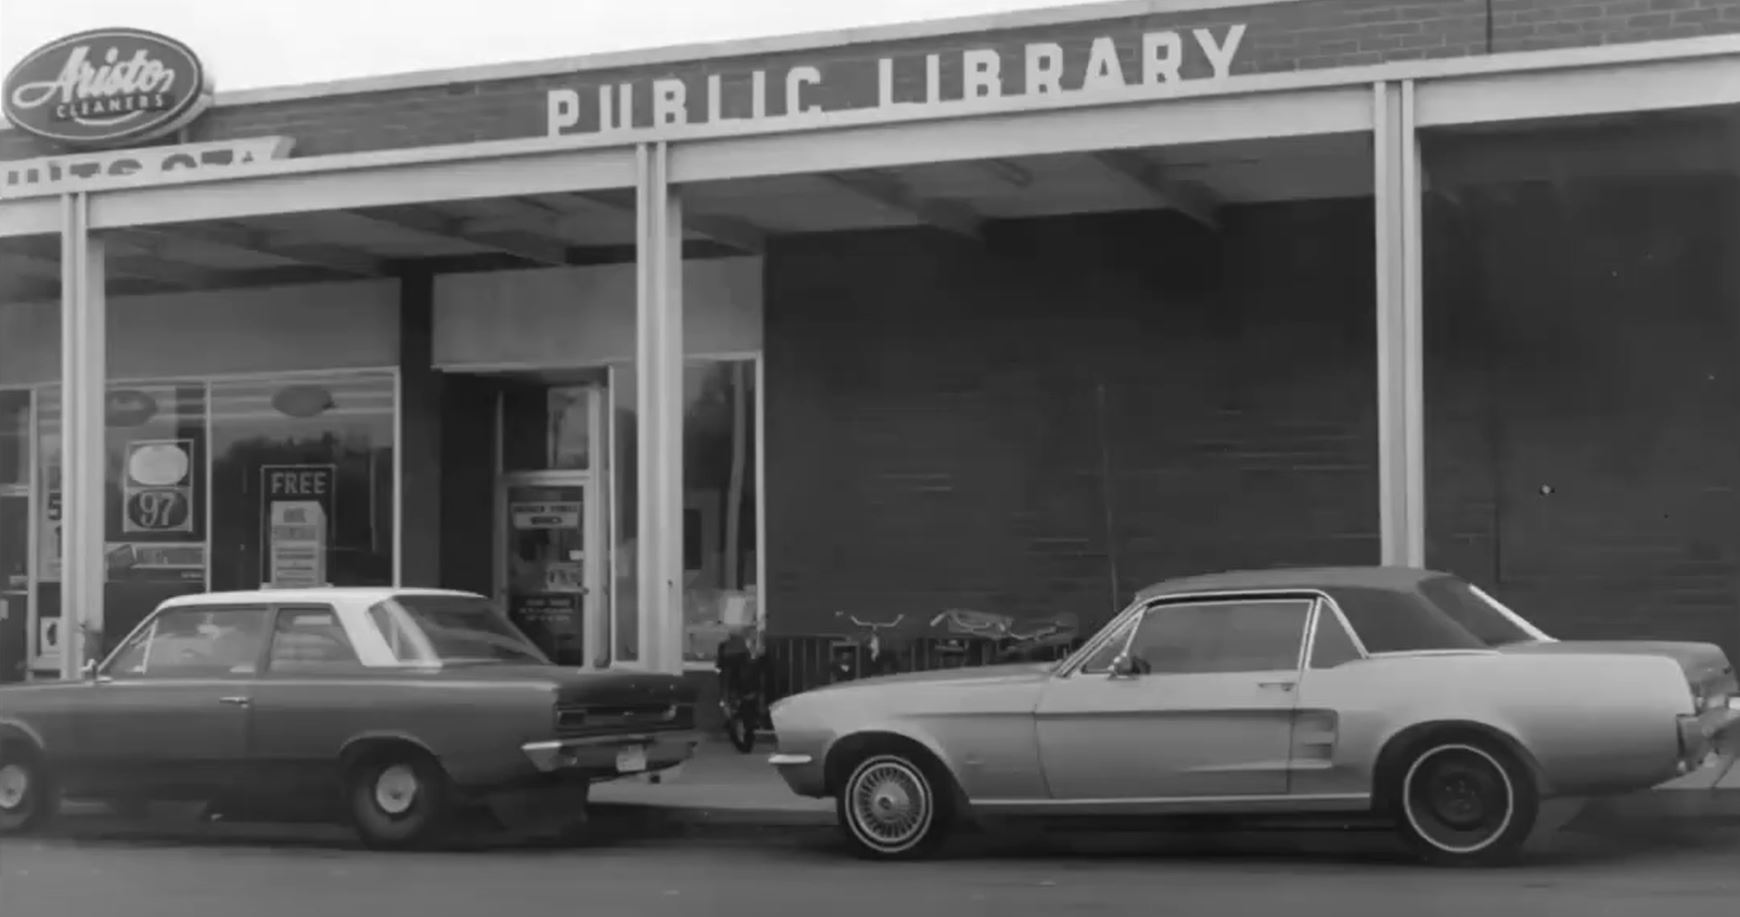 Unequal Access: The Desegregation of Public Libraries in Northern Virginia